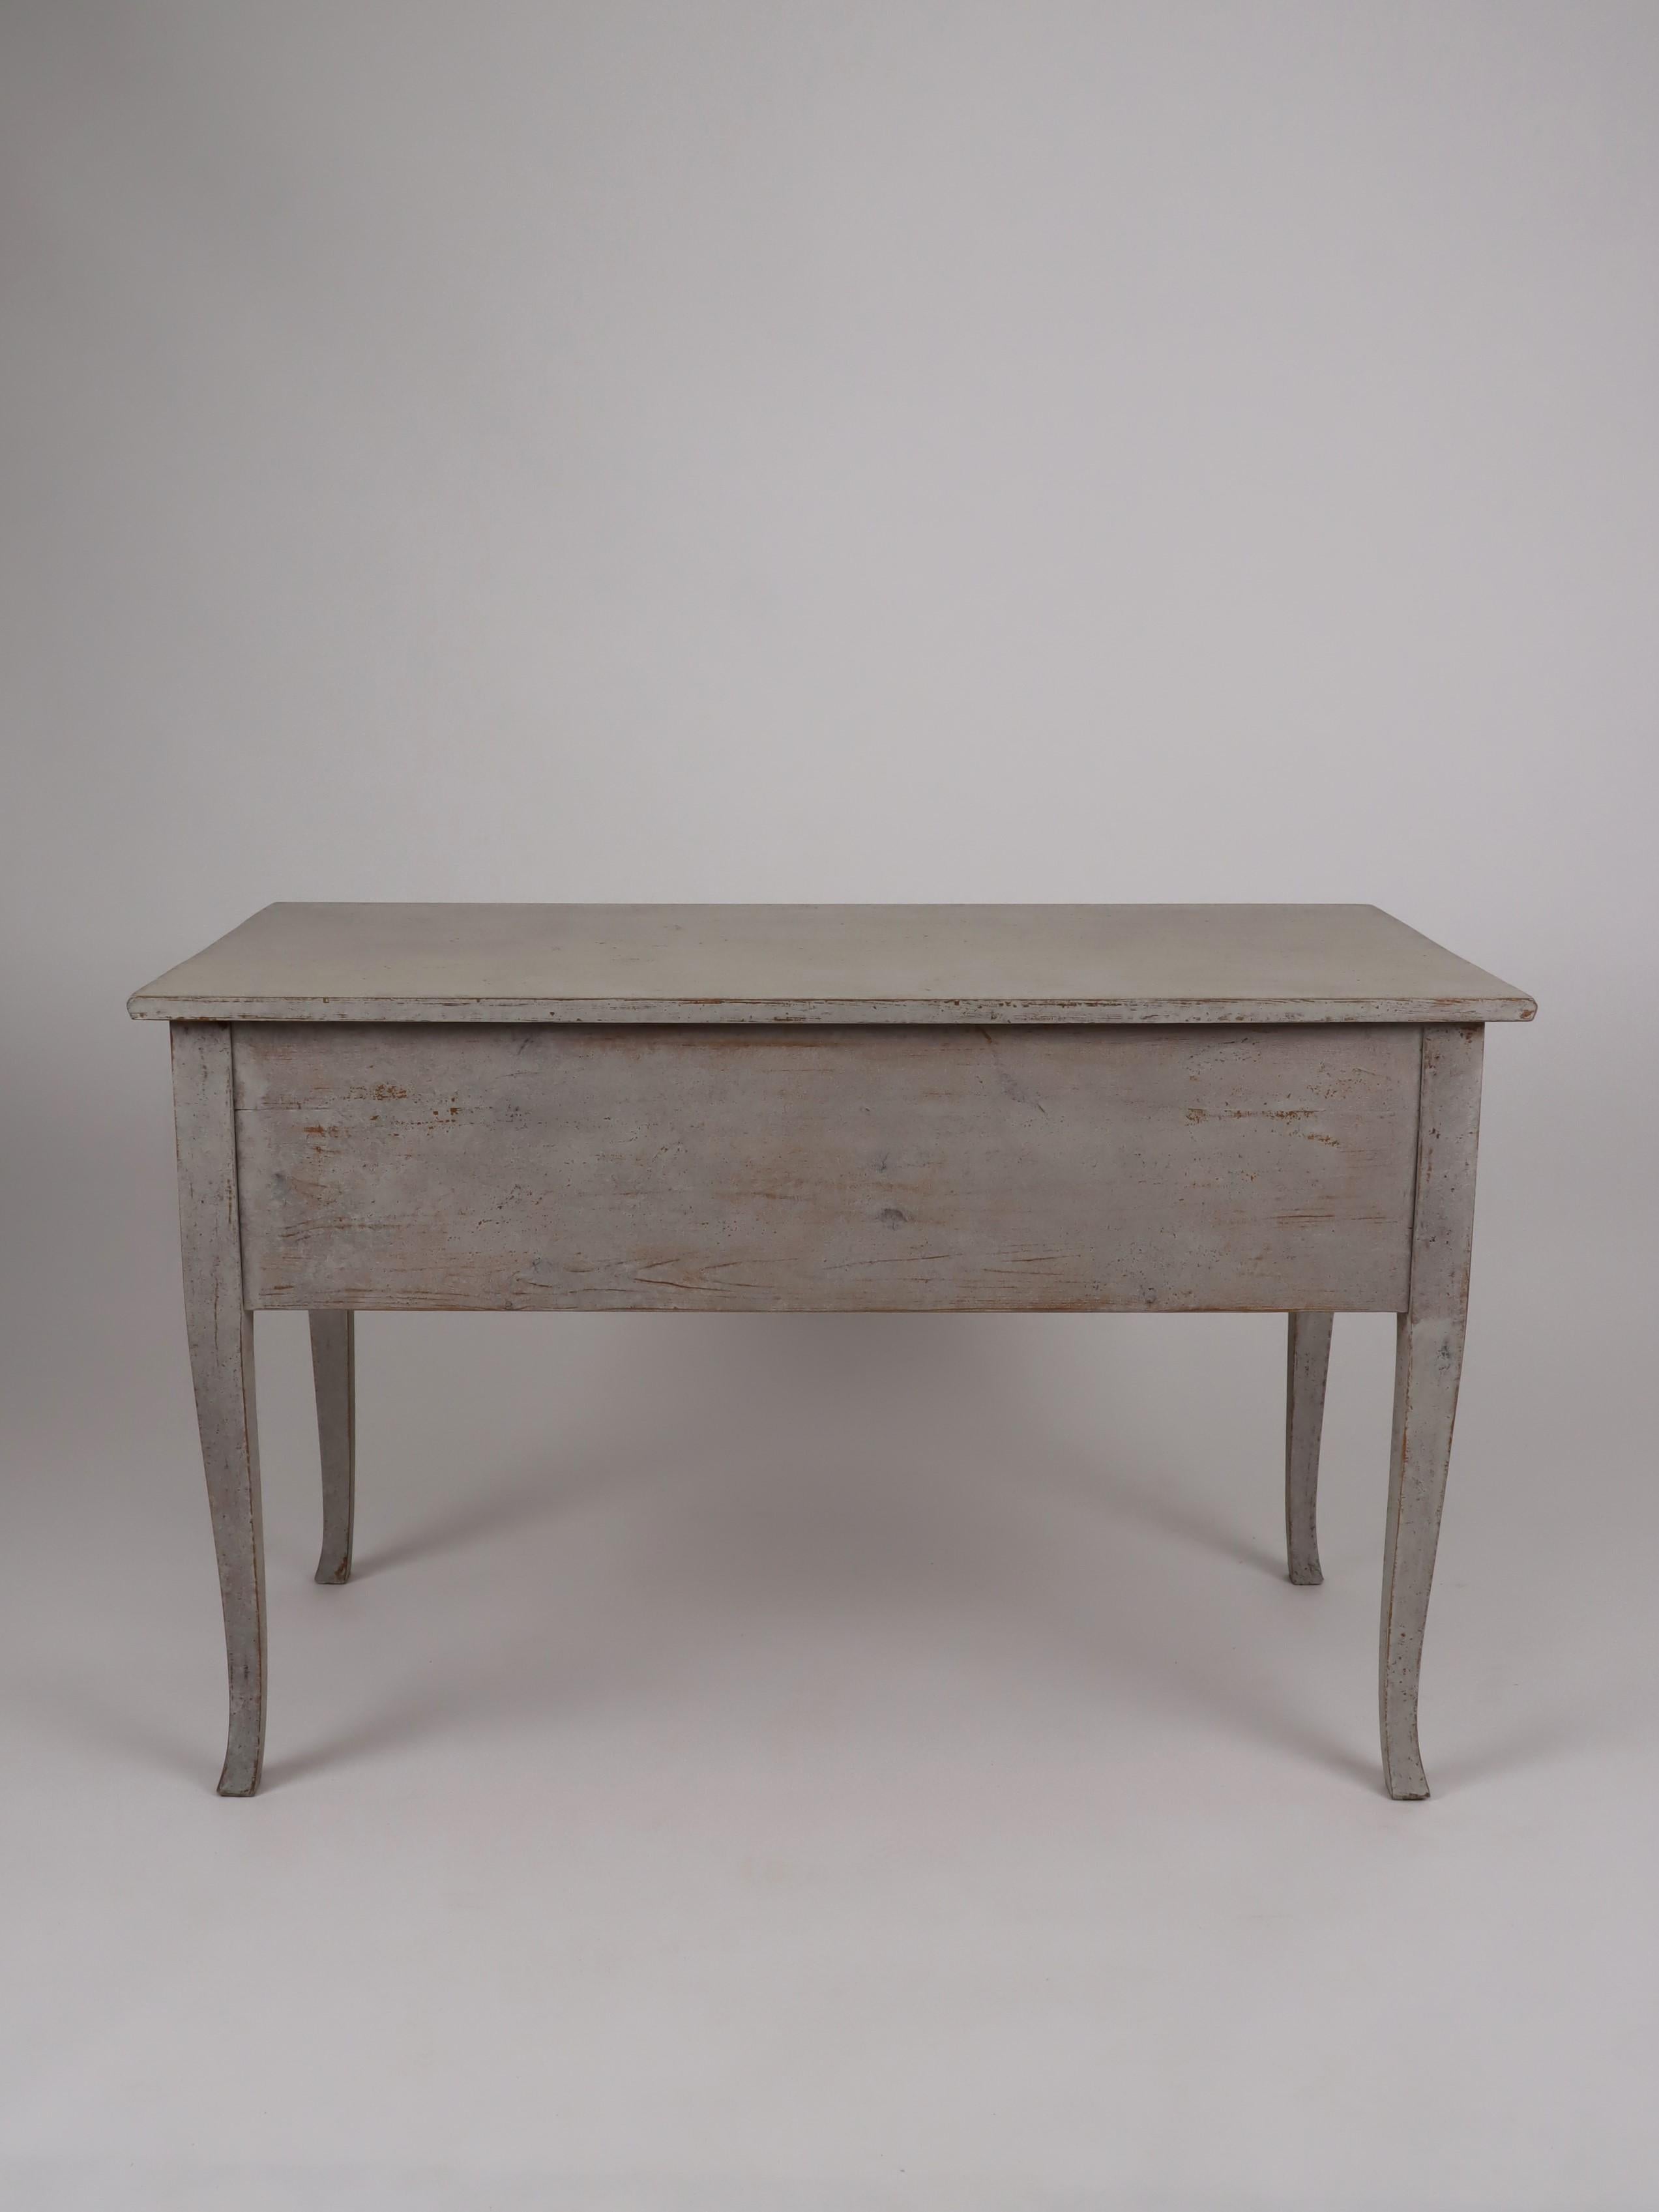 Swedish Gray Cream Painted Desk with Five Carved Reeded Drawers, 20th Century For Sale 6